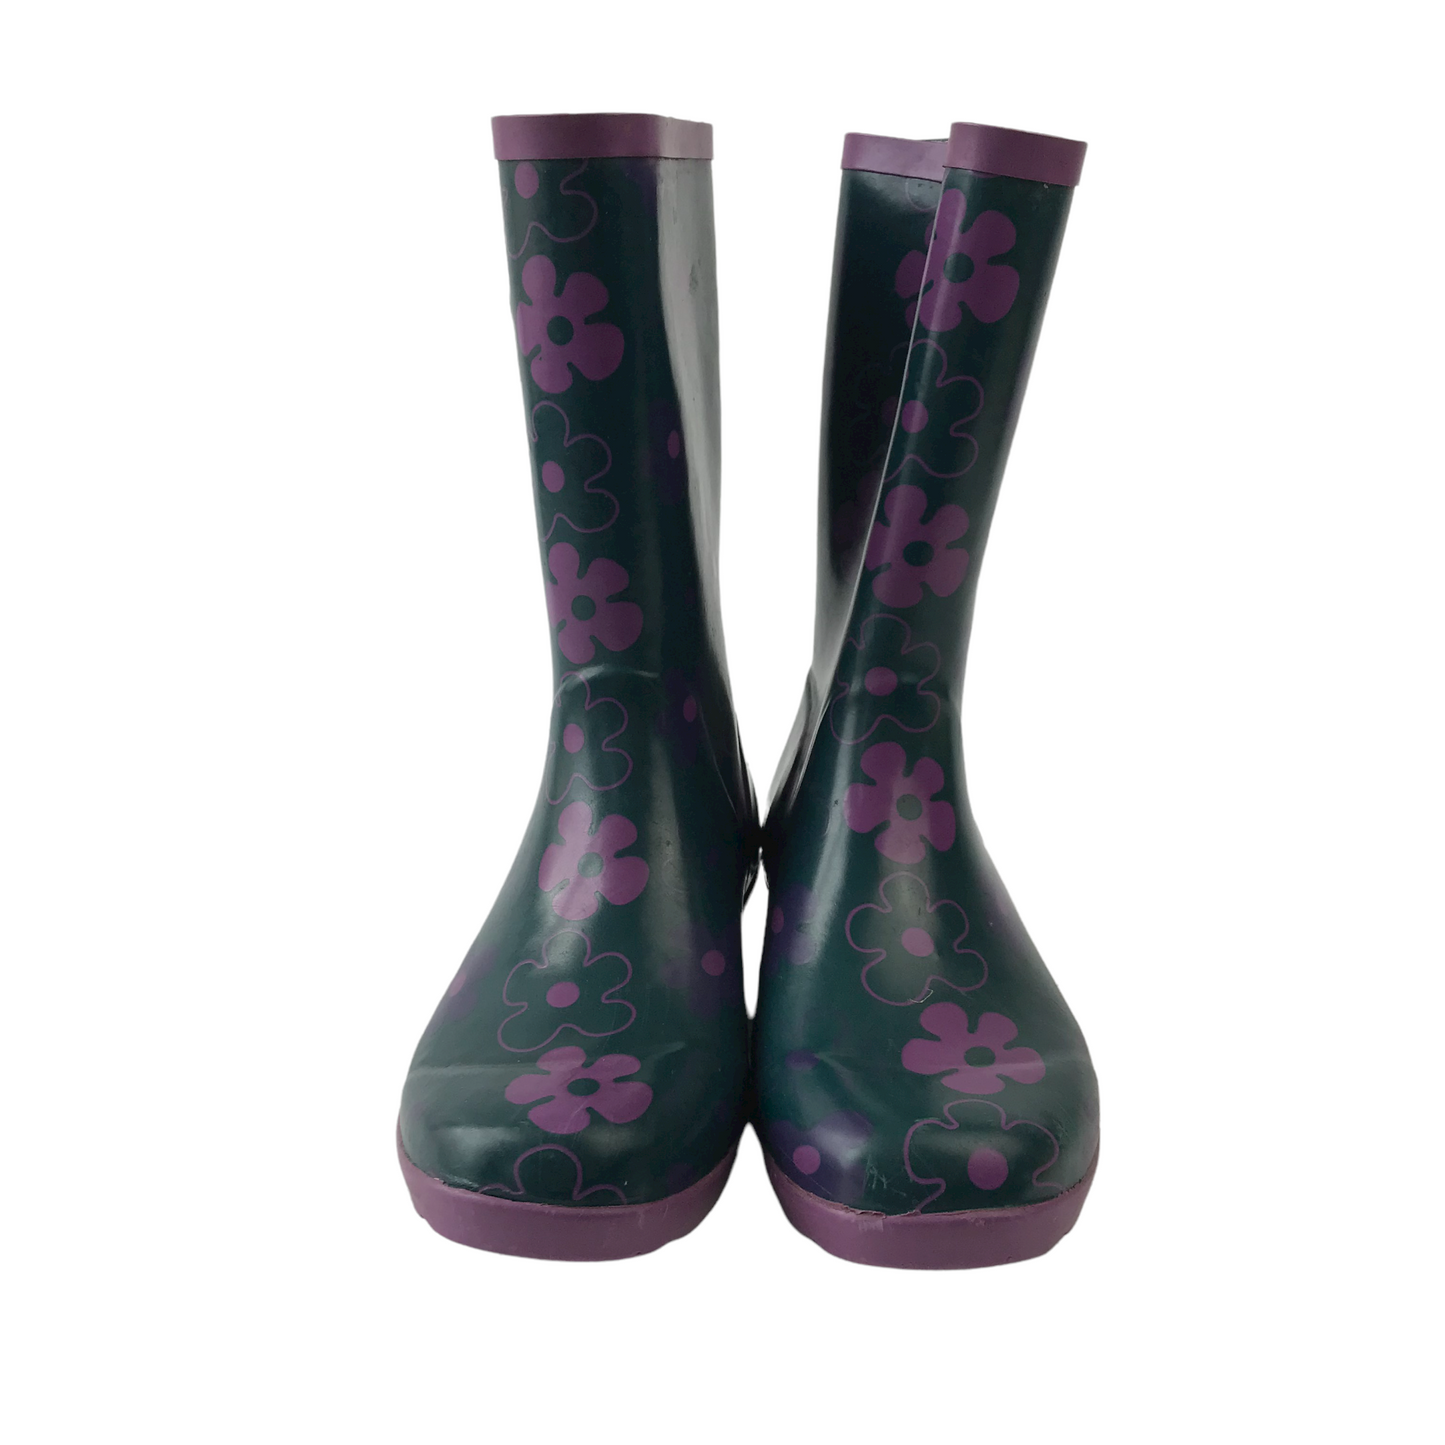 Clarks Navy and Purple Floral Wellies Shoe Size 1.5